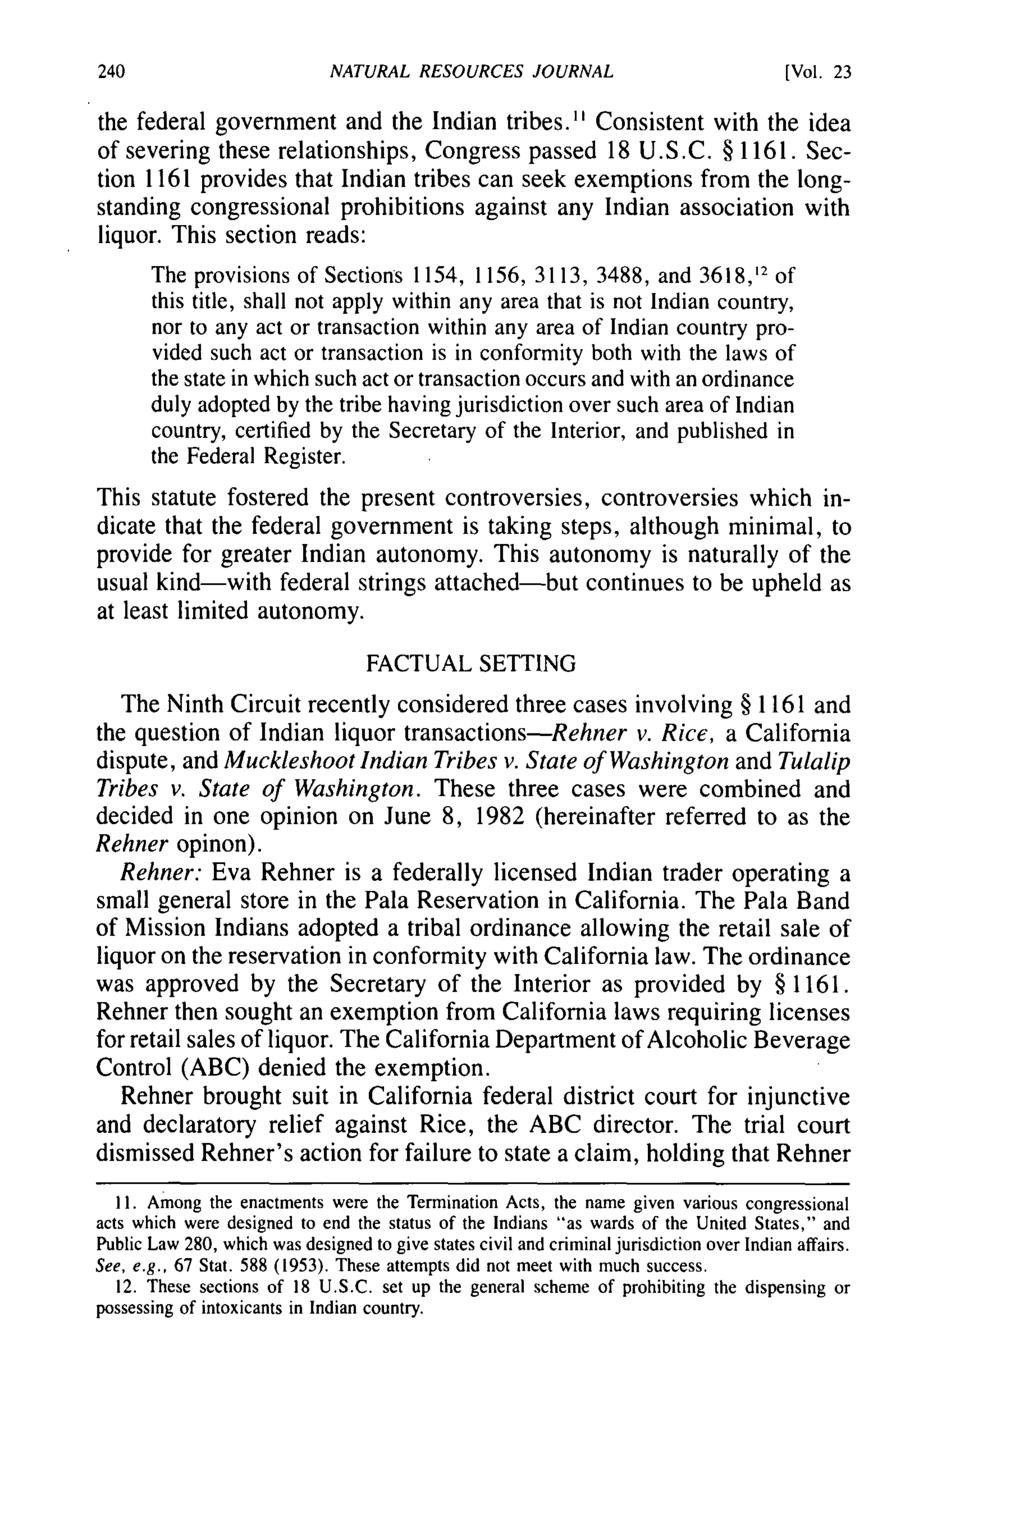 NATURAL RESOURCES JOURNAL [Vol. 23 the federal government and the Indian tribes. " Consistent with the idea of severing these relationships, Congress passed 18 U.S.C. 1161.